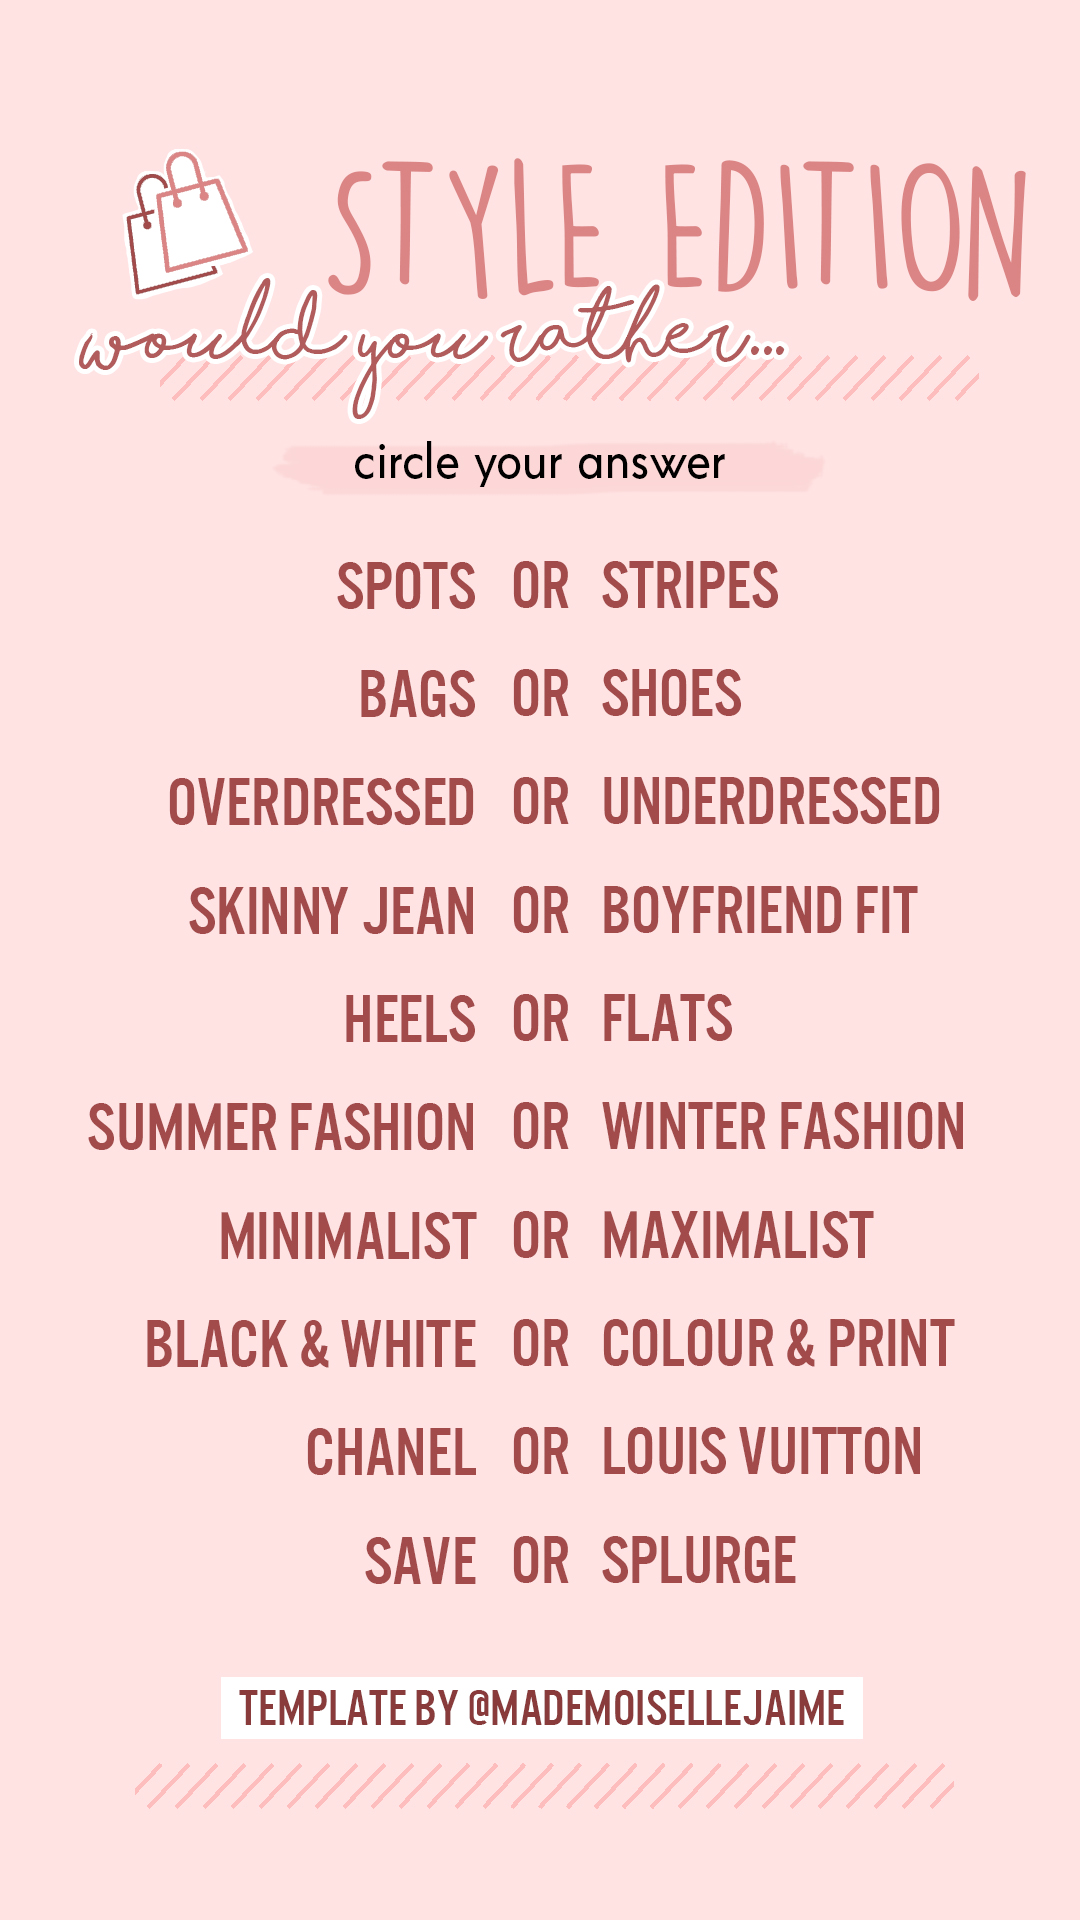 insta stories template would you rather style edition